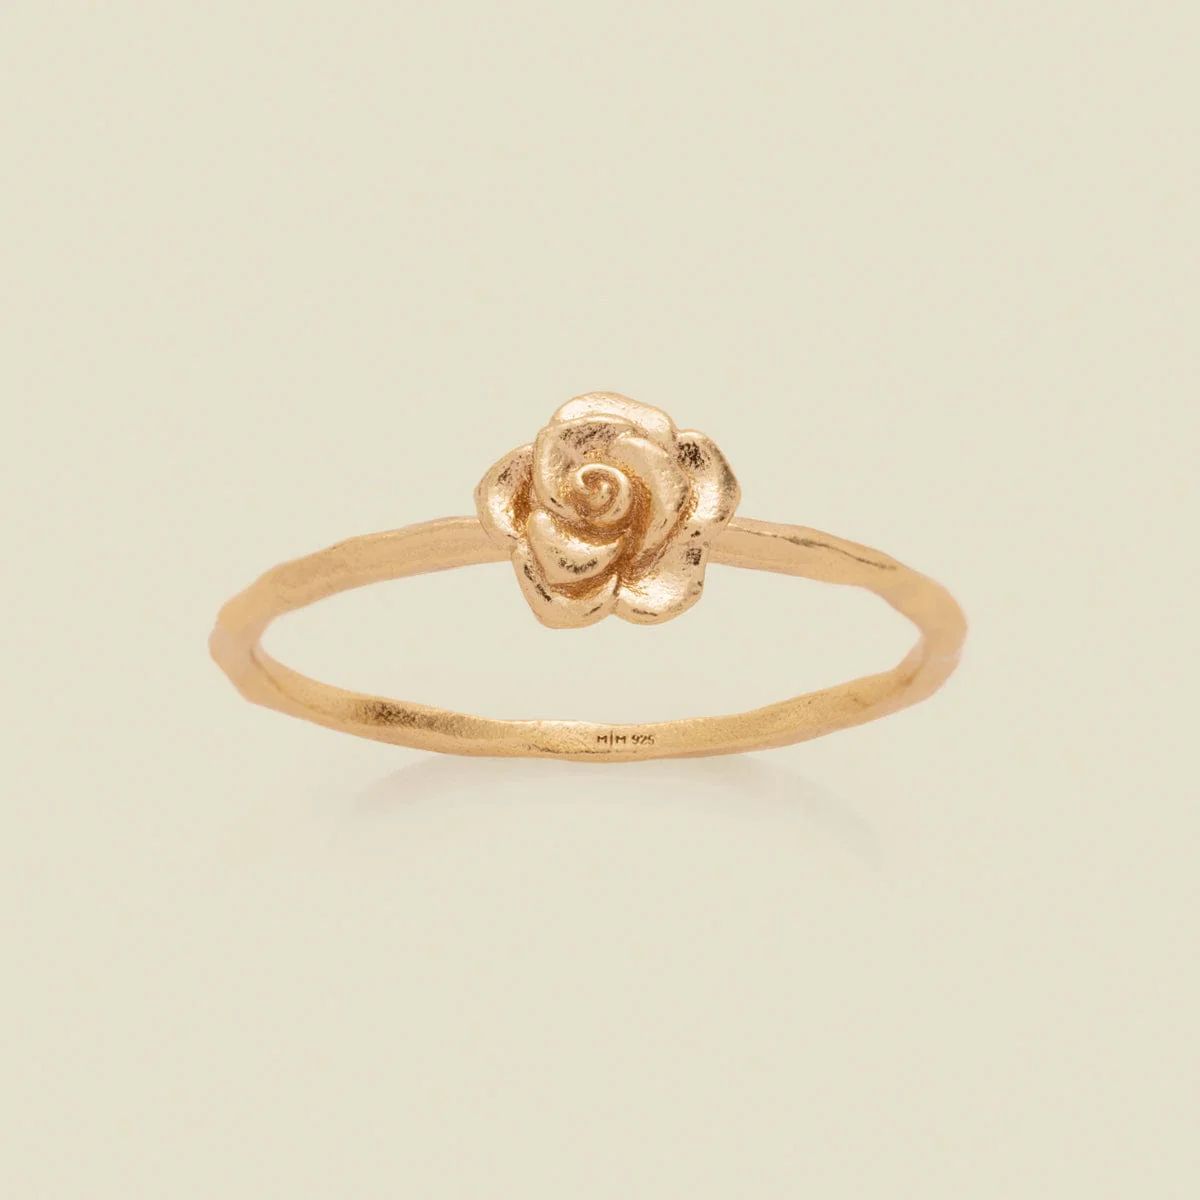 June Birth Flower Ring | Gold Vermeil | Birth Flower Ring | Made by Mary (US)